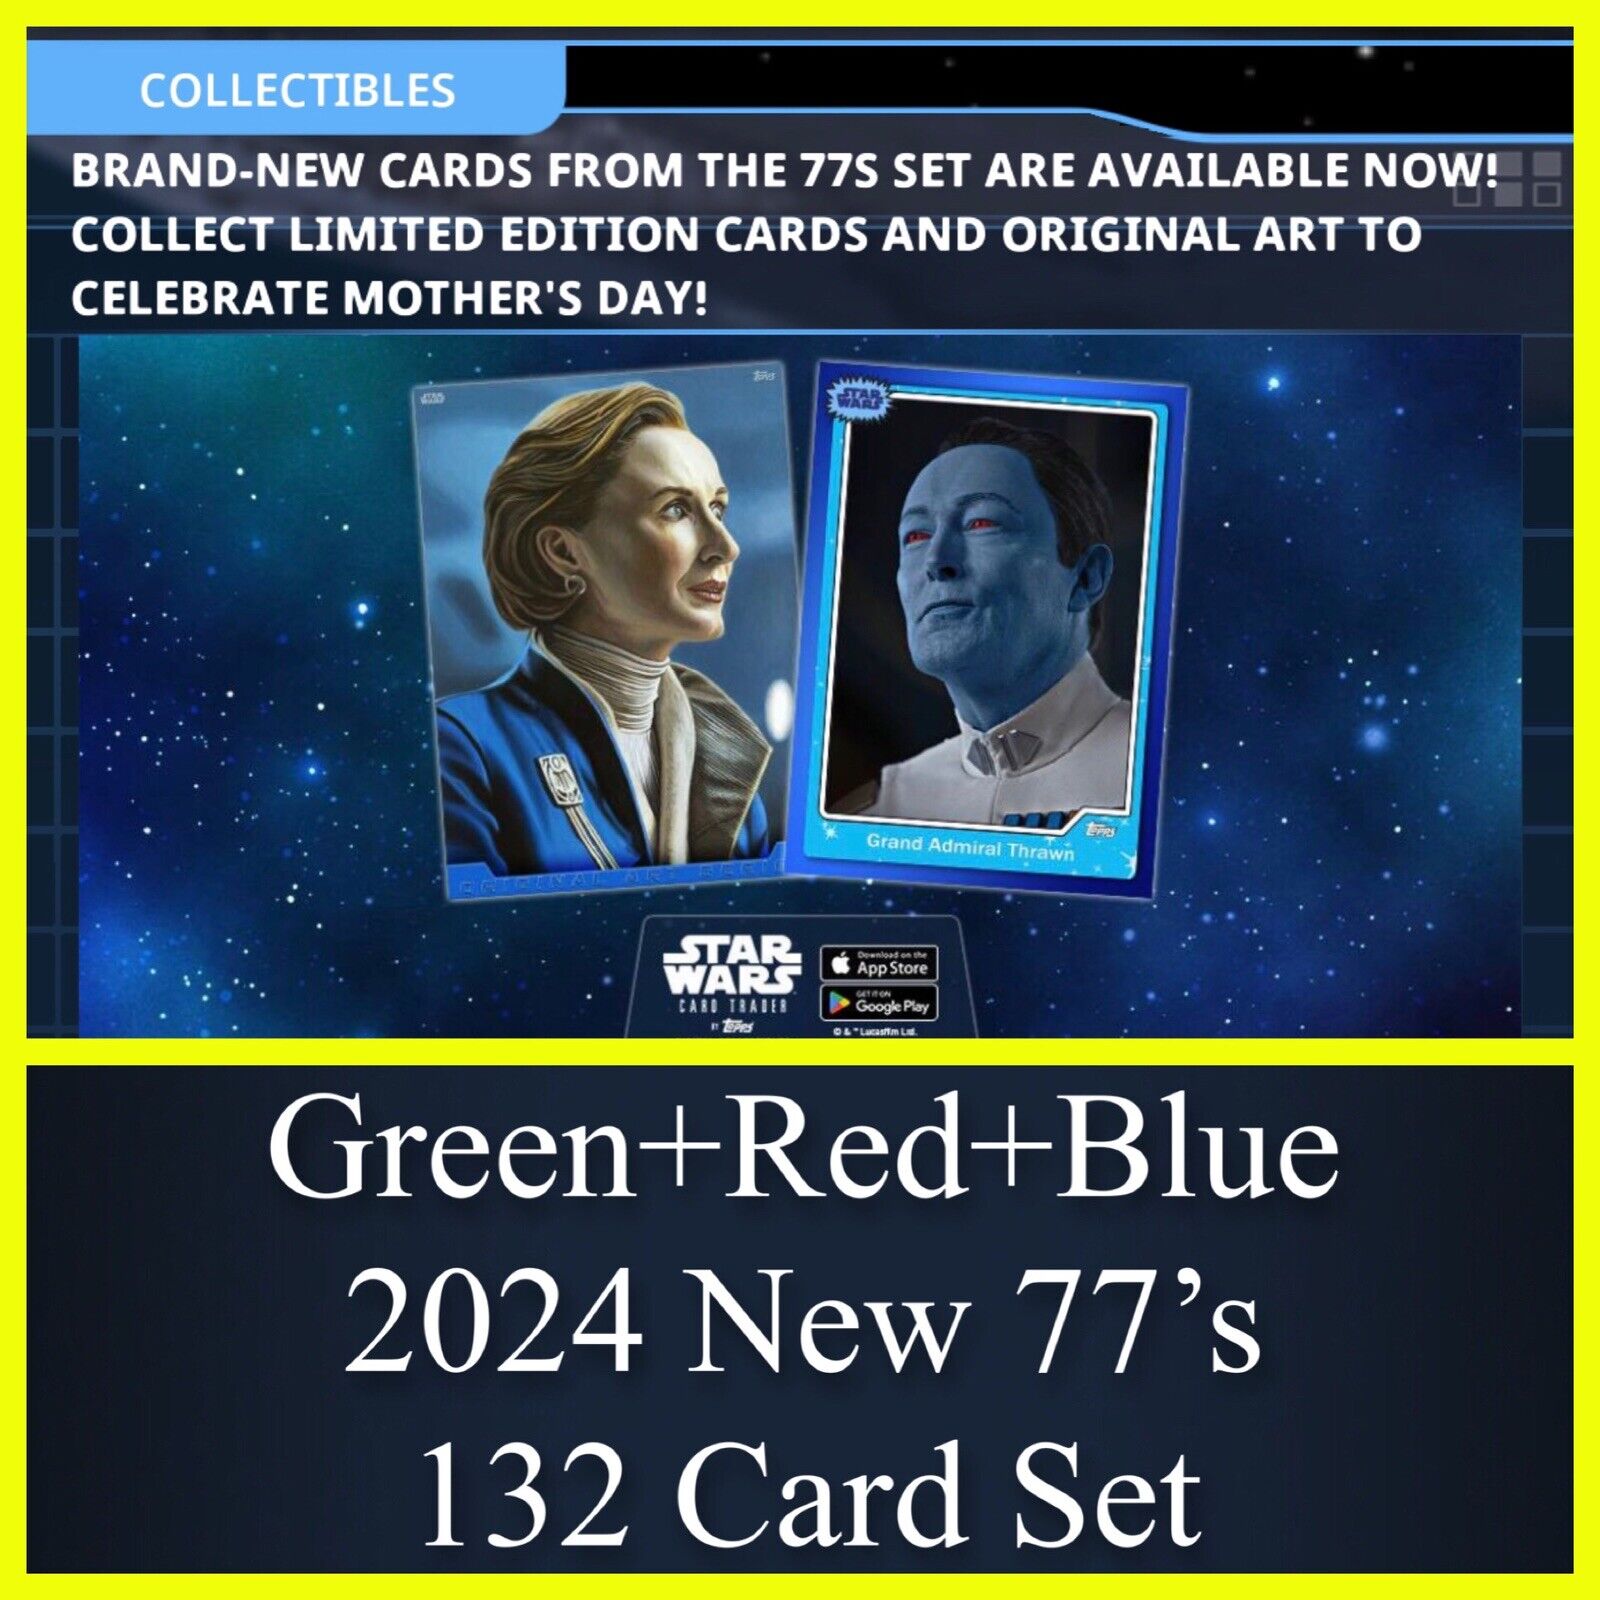 GREEN RARE+RED+BLUE 132 CARD SET-NEW 77’s 2024-TOPPS STAR WARS CARD TRADER